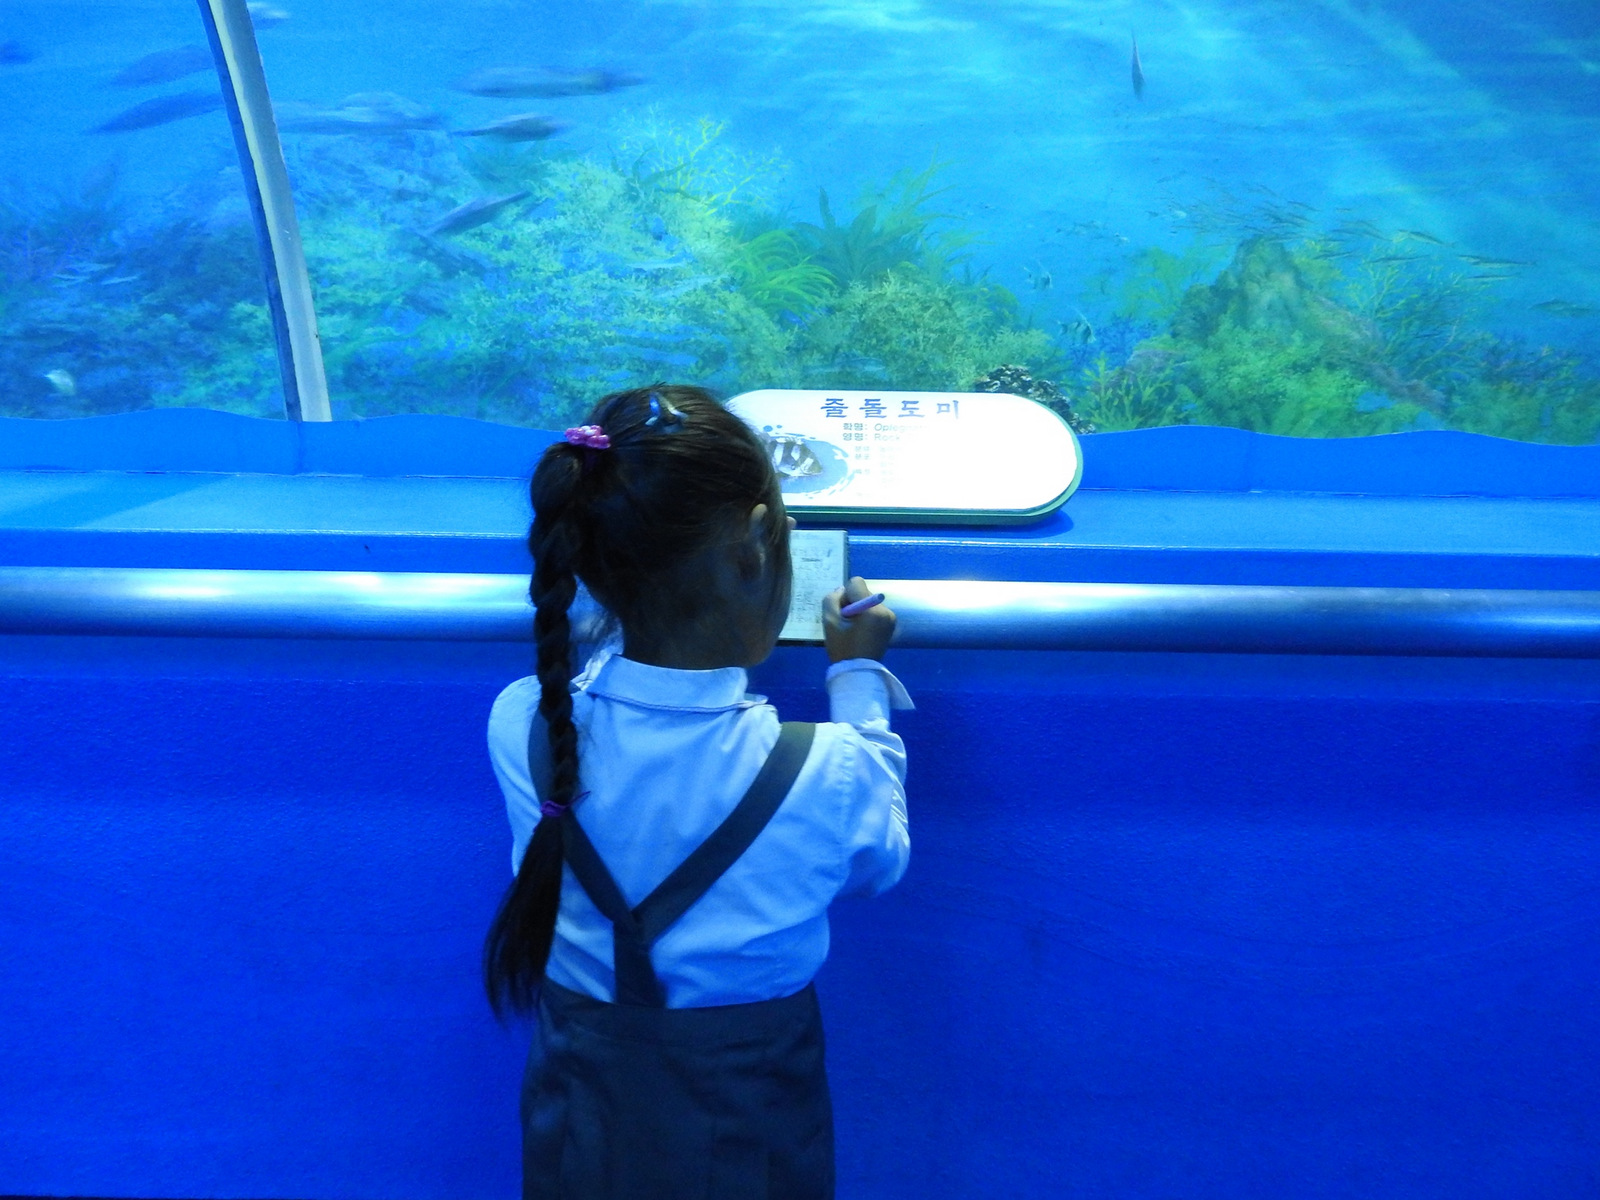 Student in the aquarium section of Pyongyang's zoo. While the zoo was well-maintained, by far most interesting was watching the human interactions, from schoolchildren to adults. Koreans returned our smiles with deep, genuine smiles.